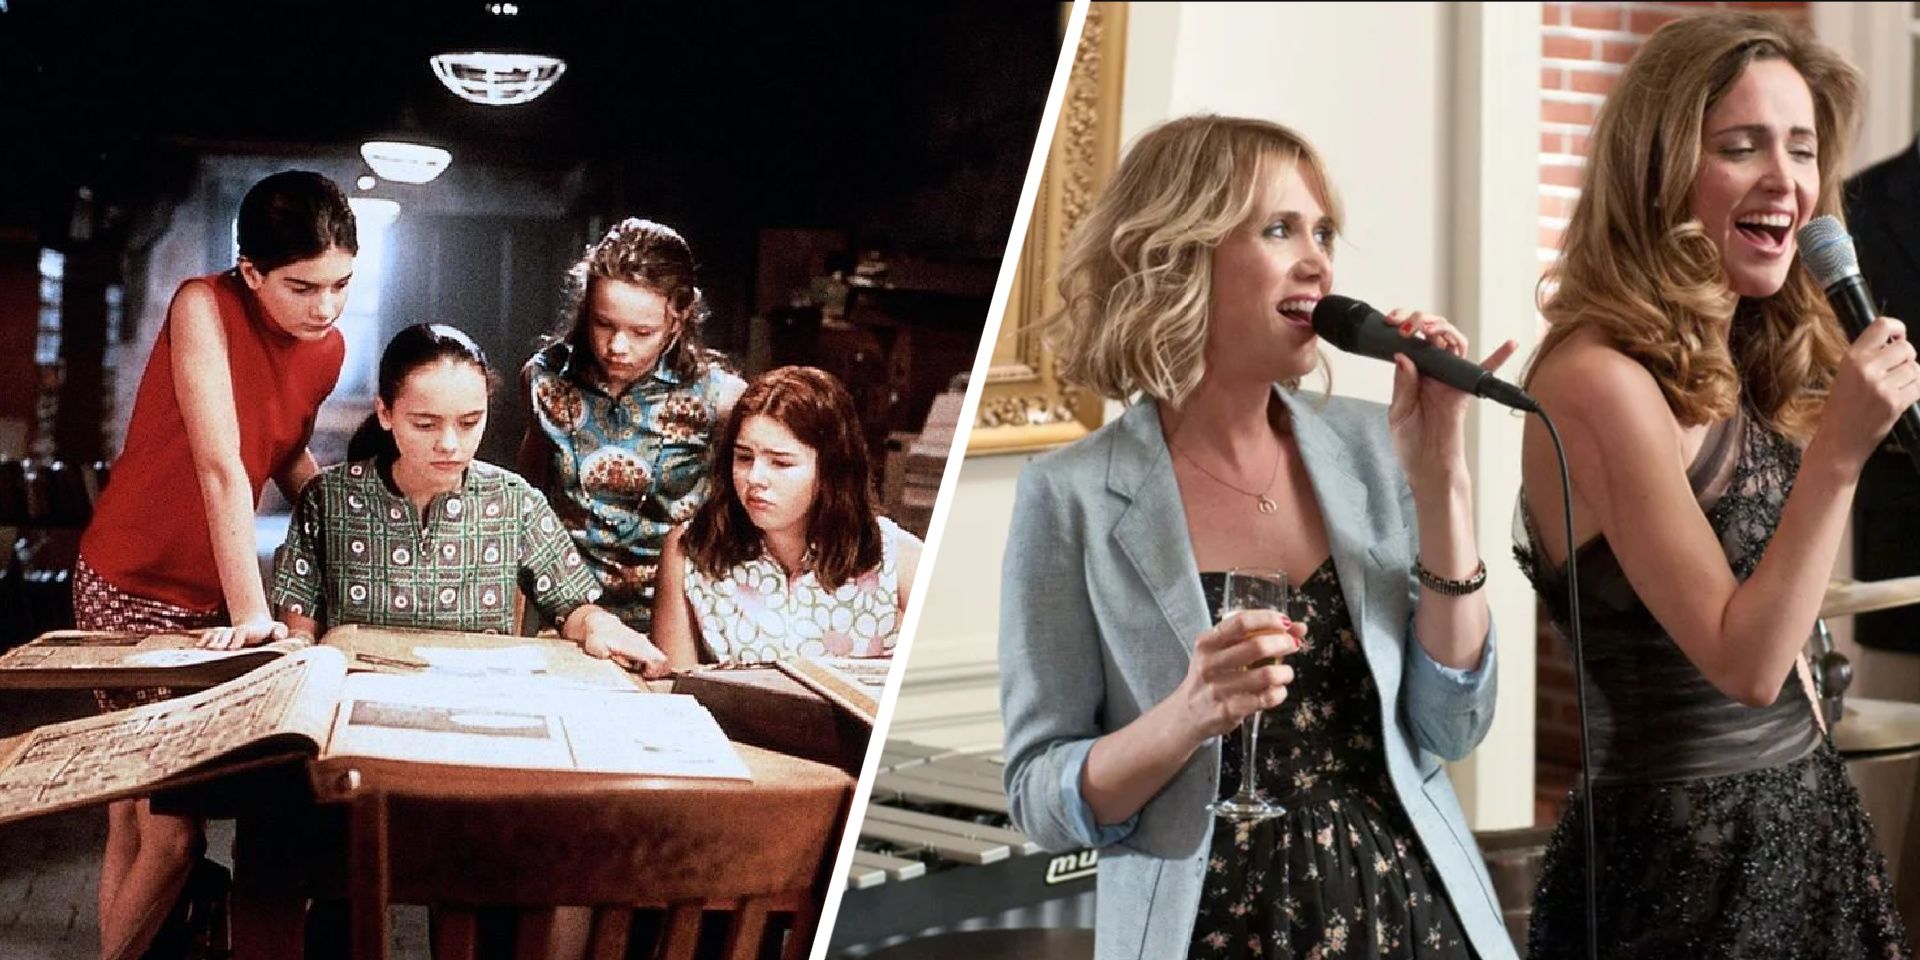 The girls research the town in Now and Then. Annie sings karaoke in Bridesmaids